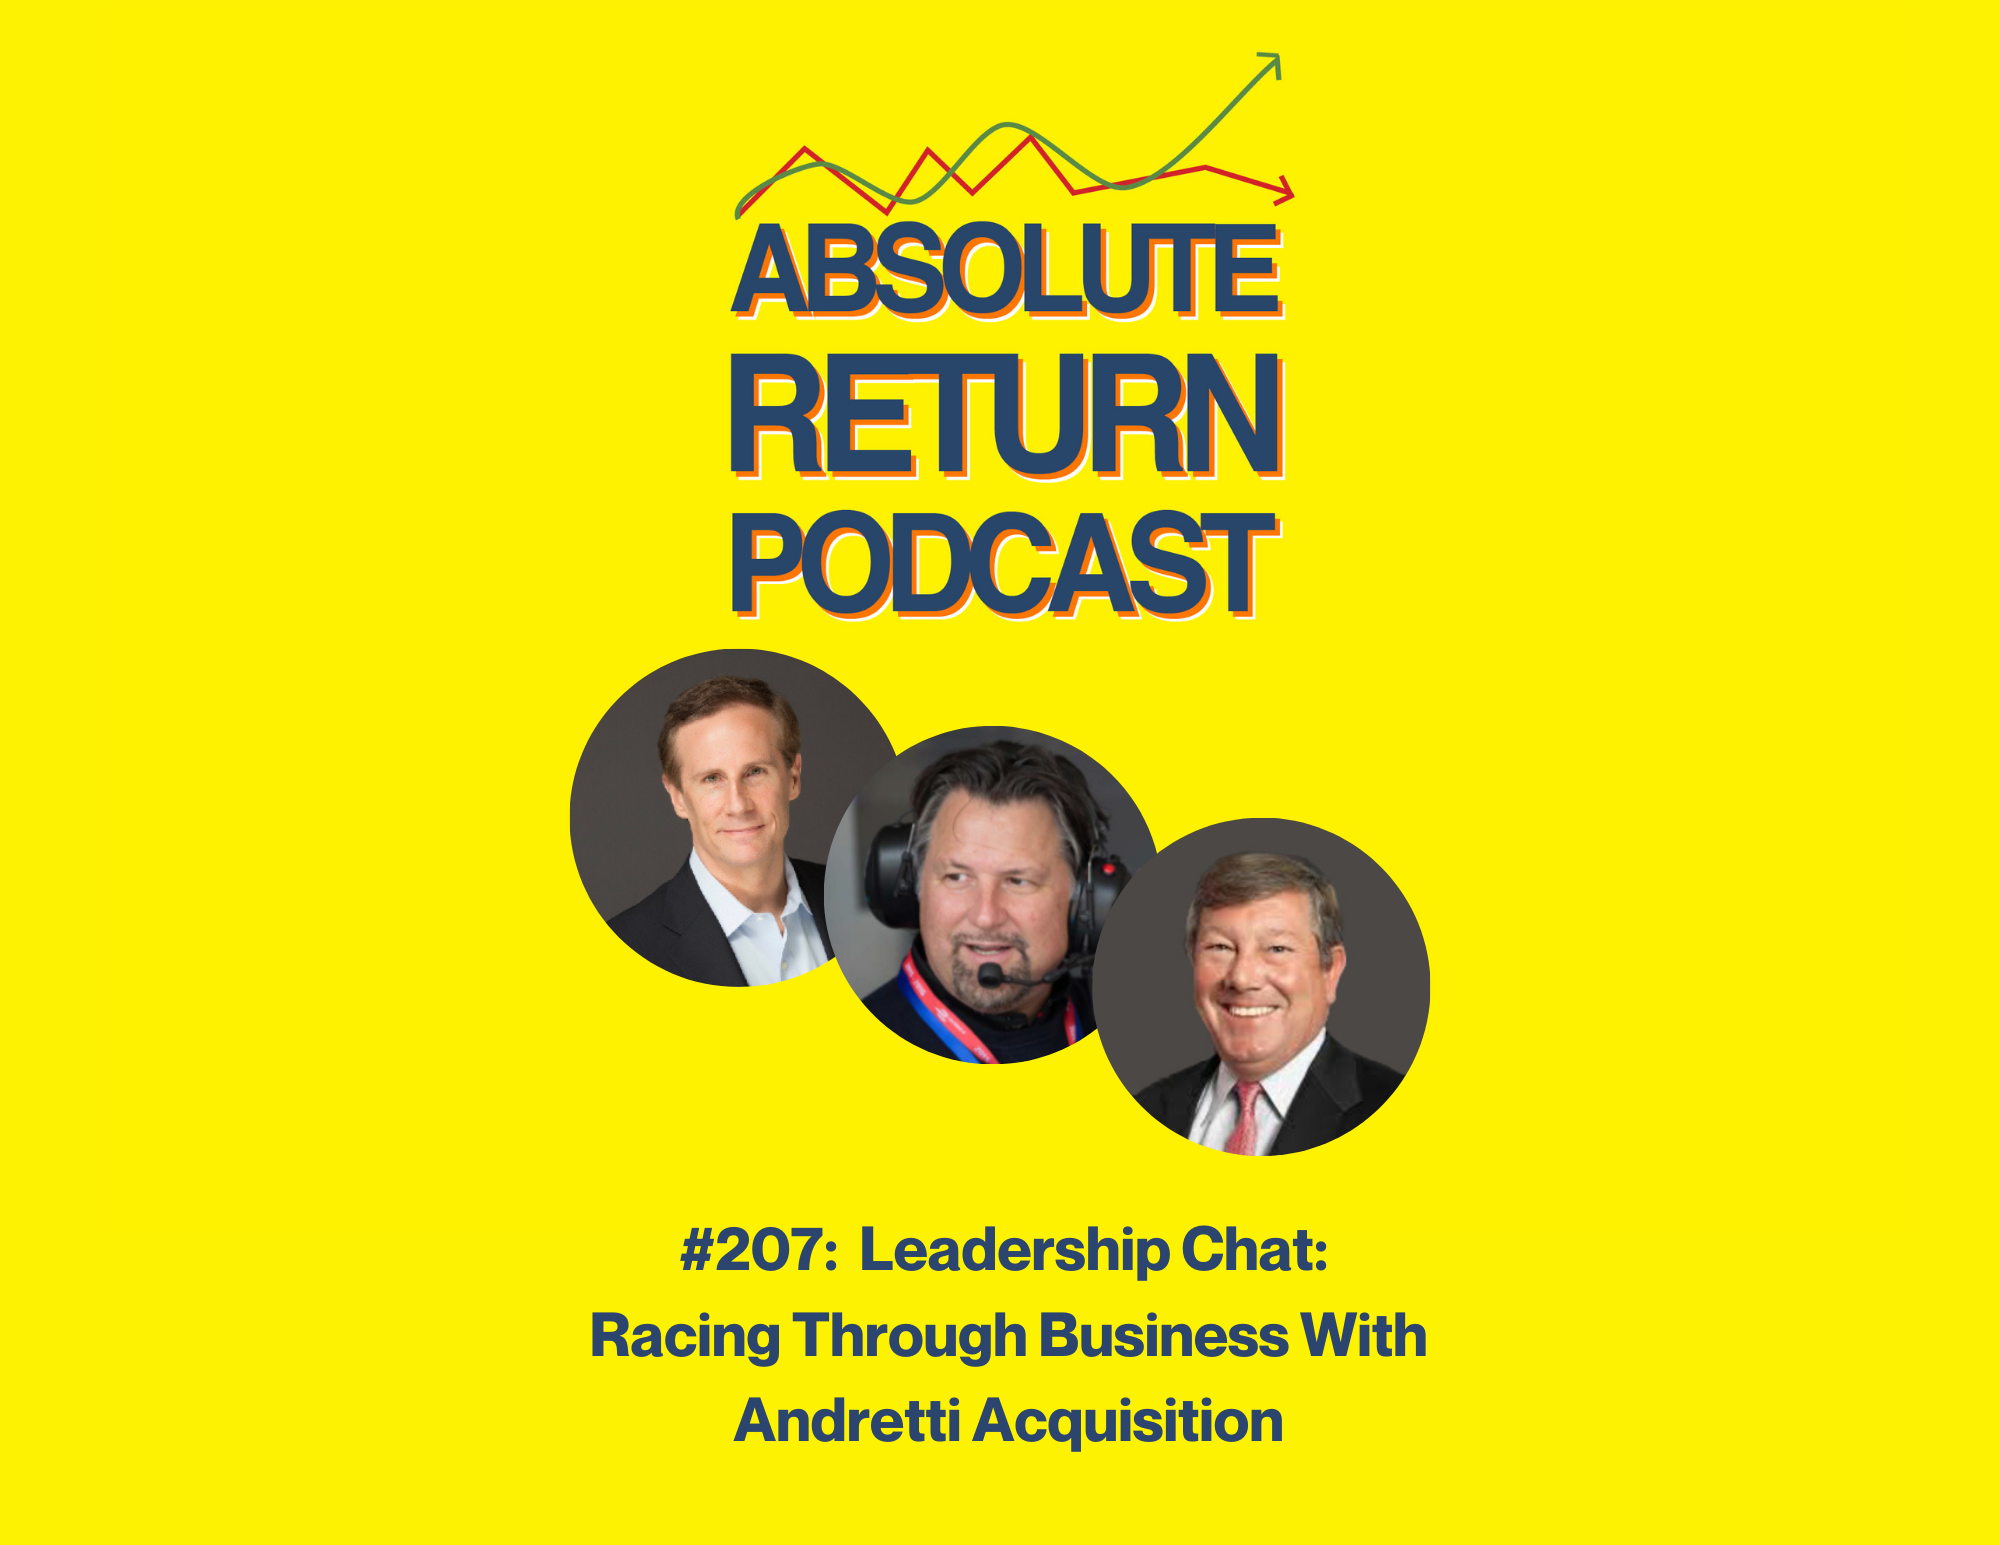 Absolute Return Podcast #207: Leadership Chat: Racing Through Business With Andretti Acquisition